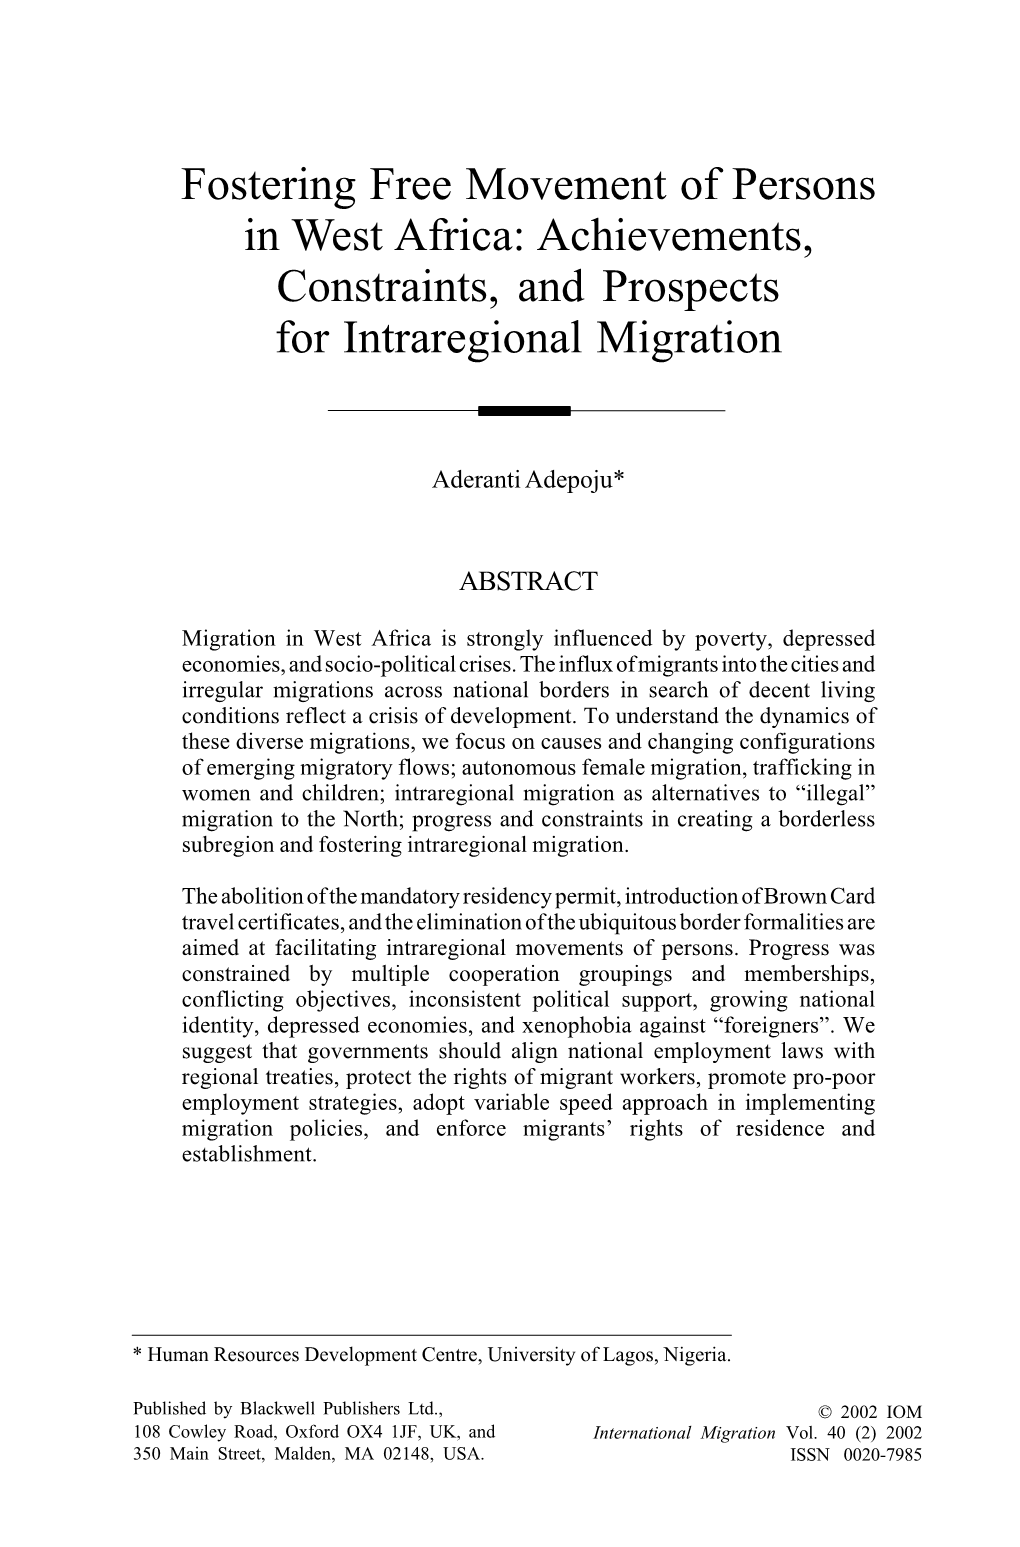 Fostering Free Movement of Persons in West Africa: Achievements, Constraints, and Prospects for Intraregional Migration